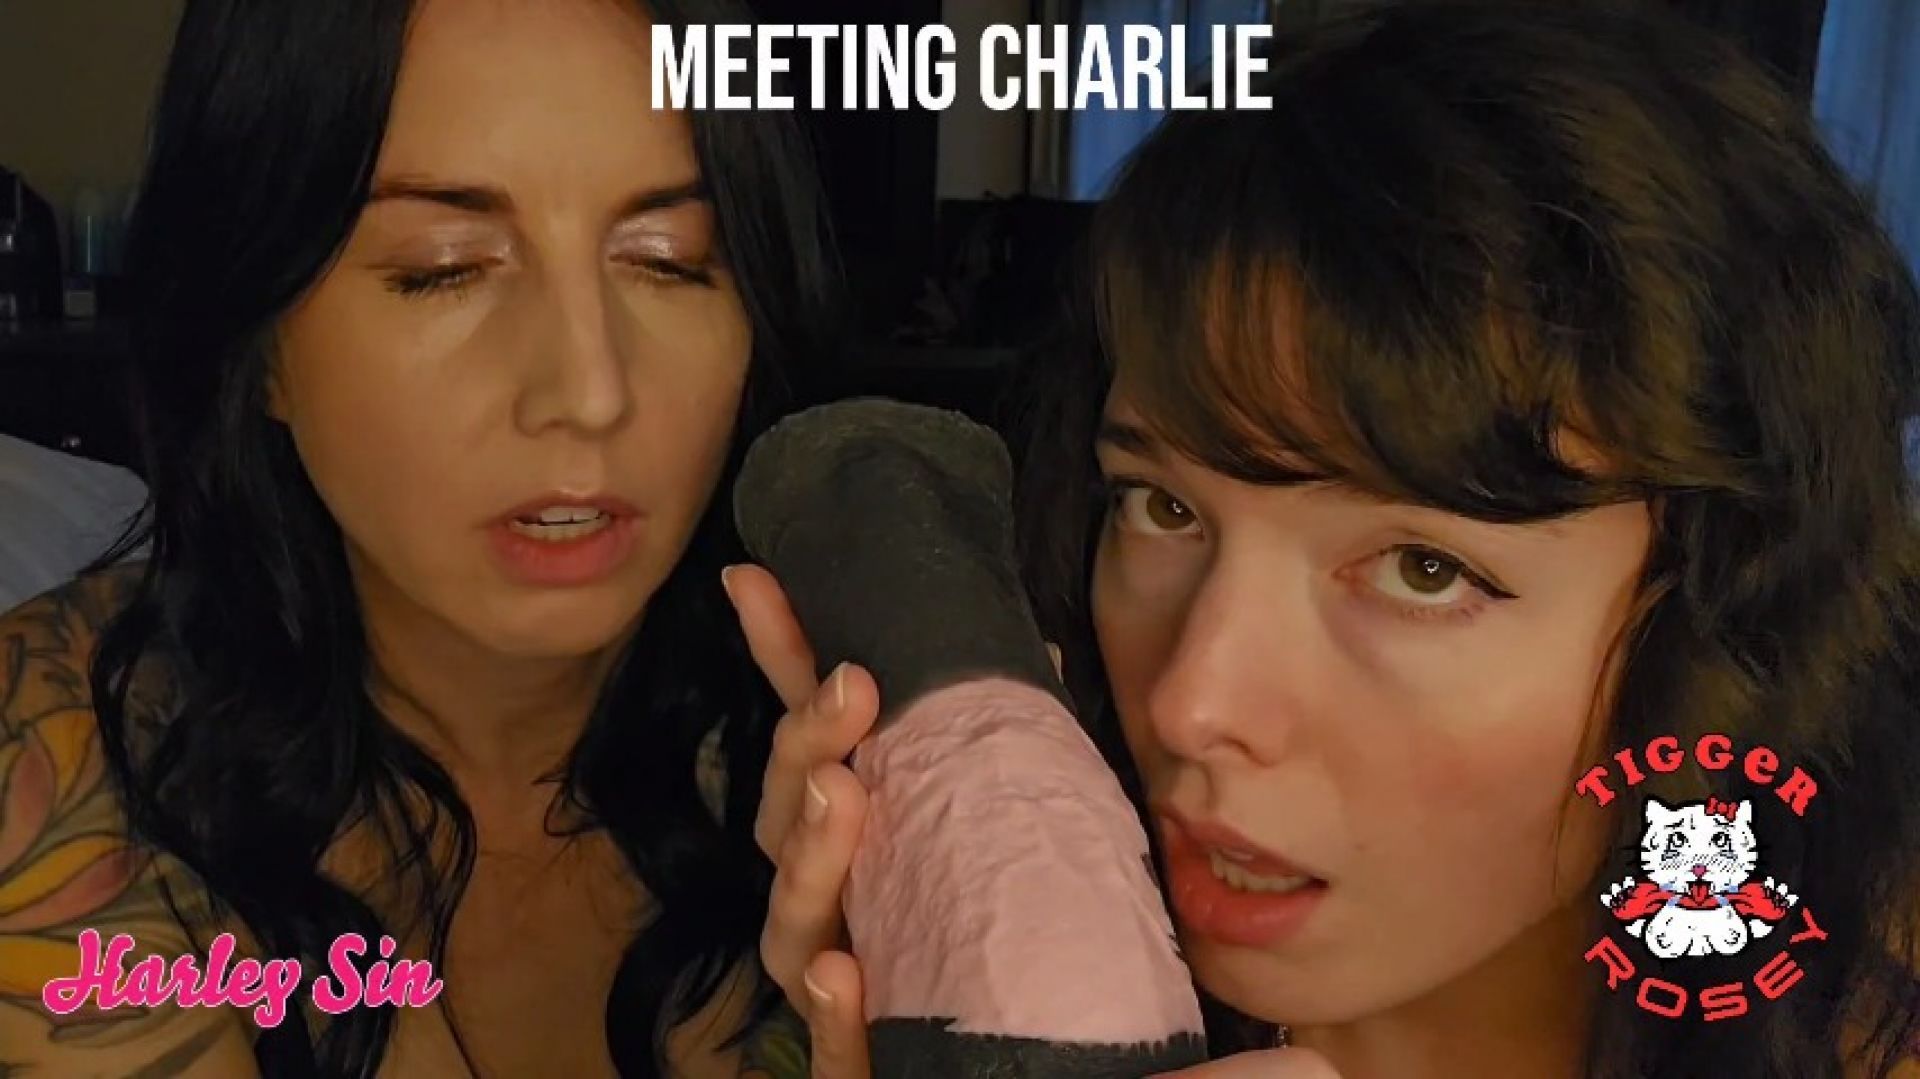 Meeting Charlie: a Pony Play Introduction ft. Harley Sin